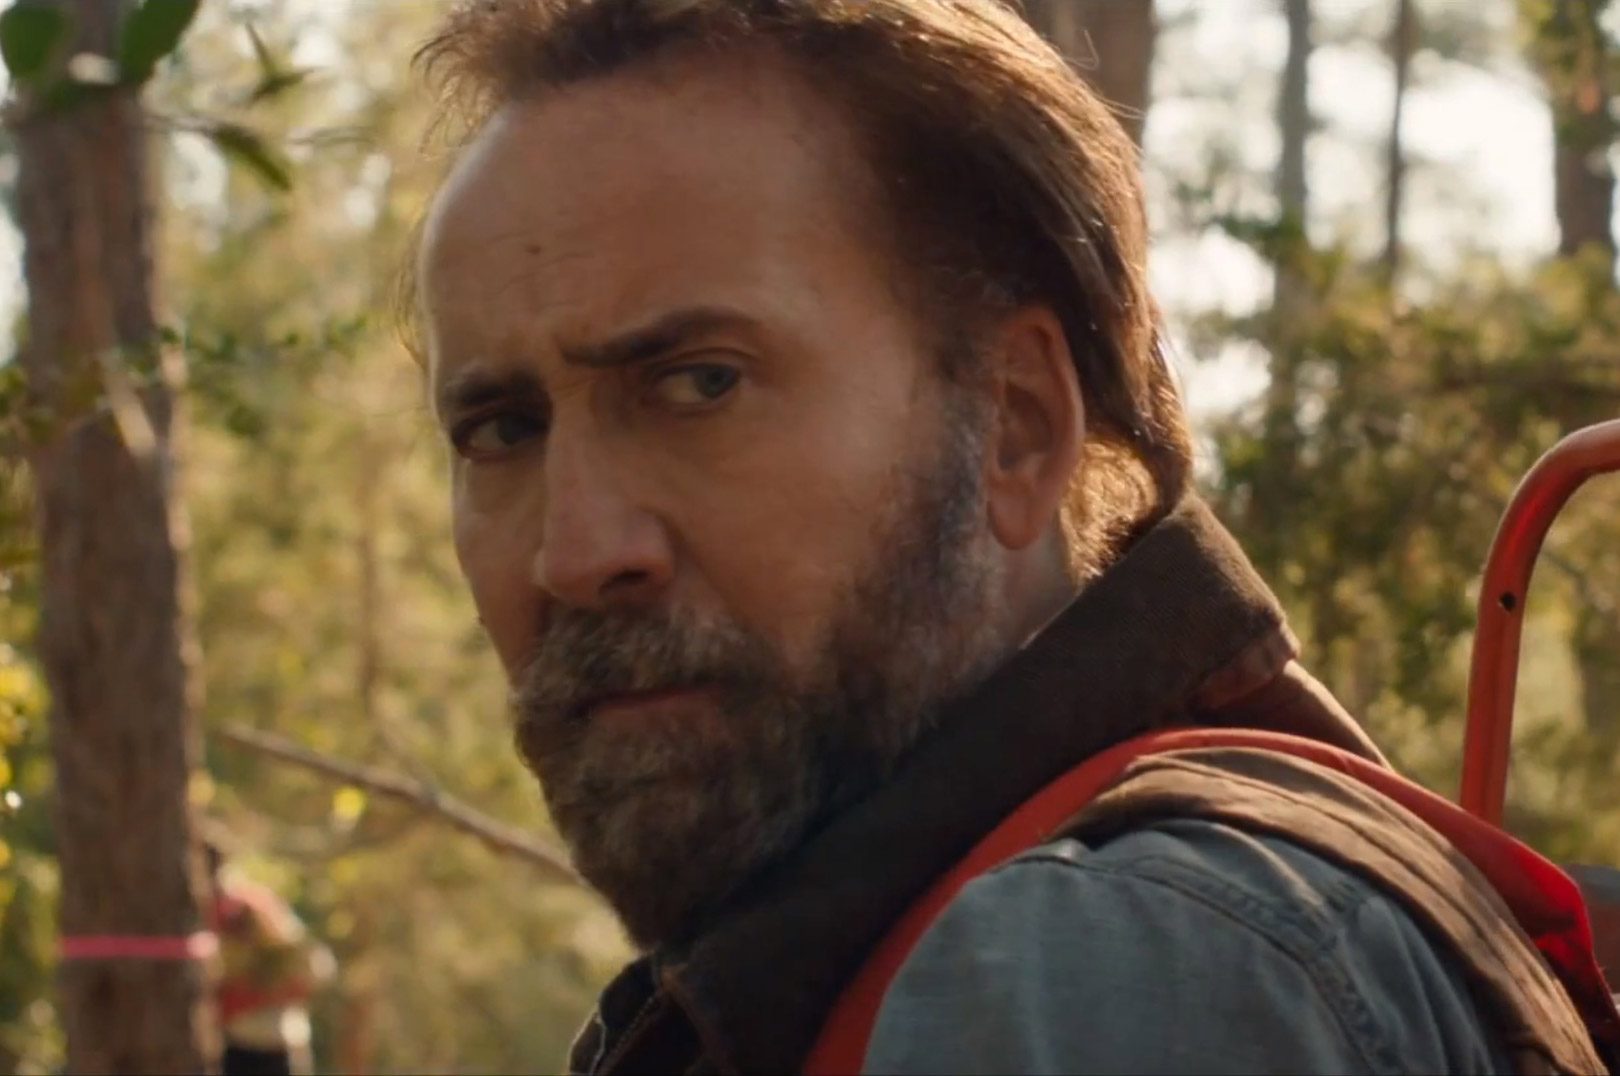 Not Even Nicolas Cage Dares to See His Next Movie: “It's Too Much of a Whacked-Out Trip”